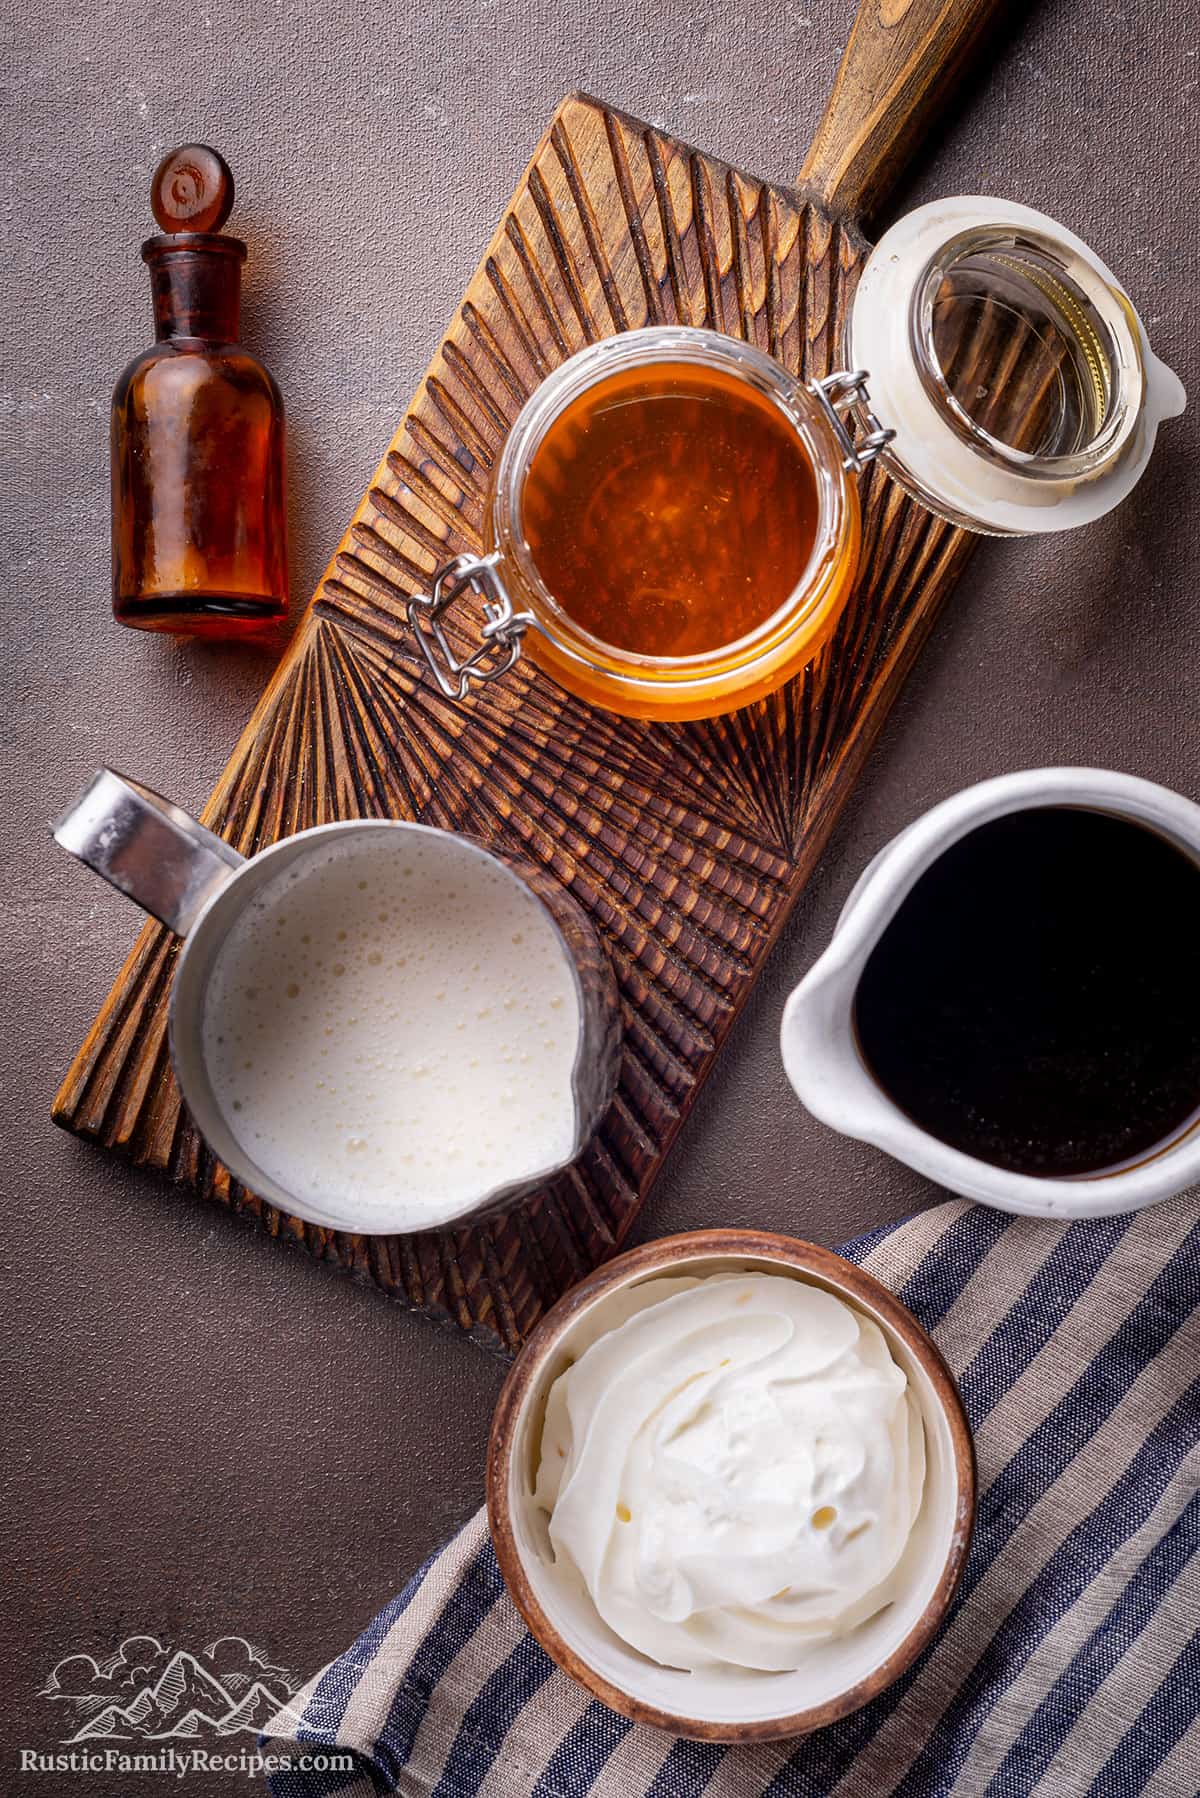 Ingredients for a honey vanilla latte in small bowls